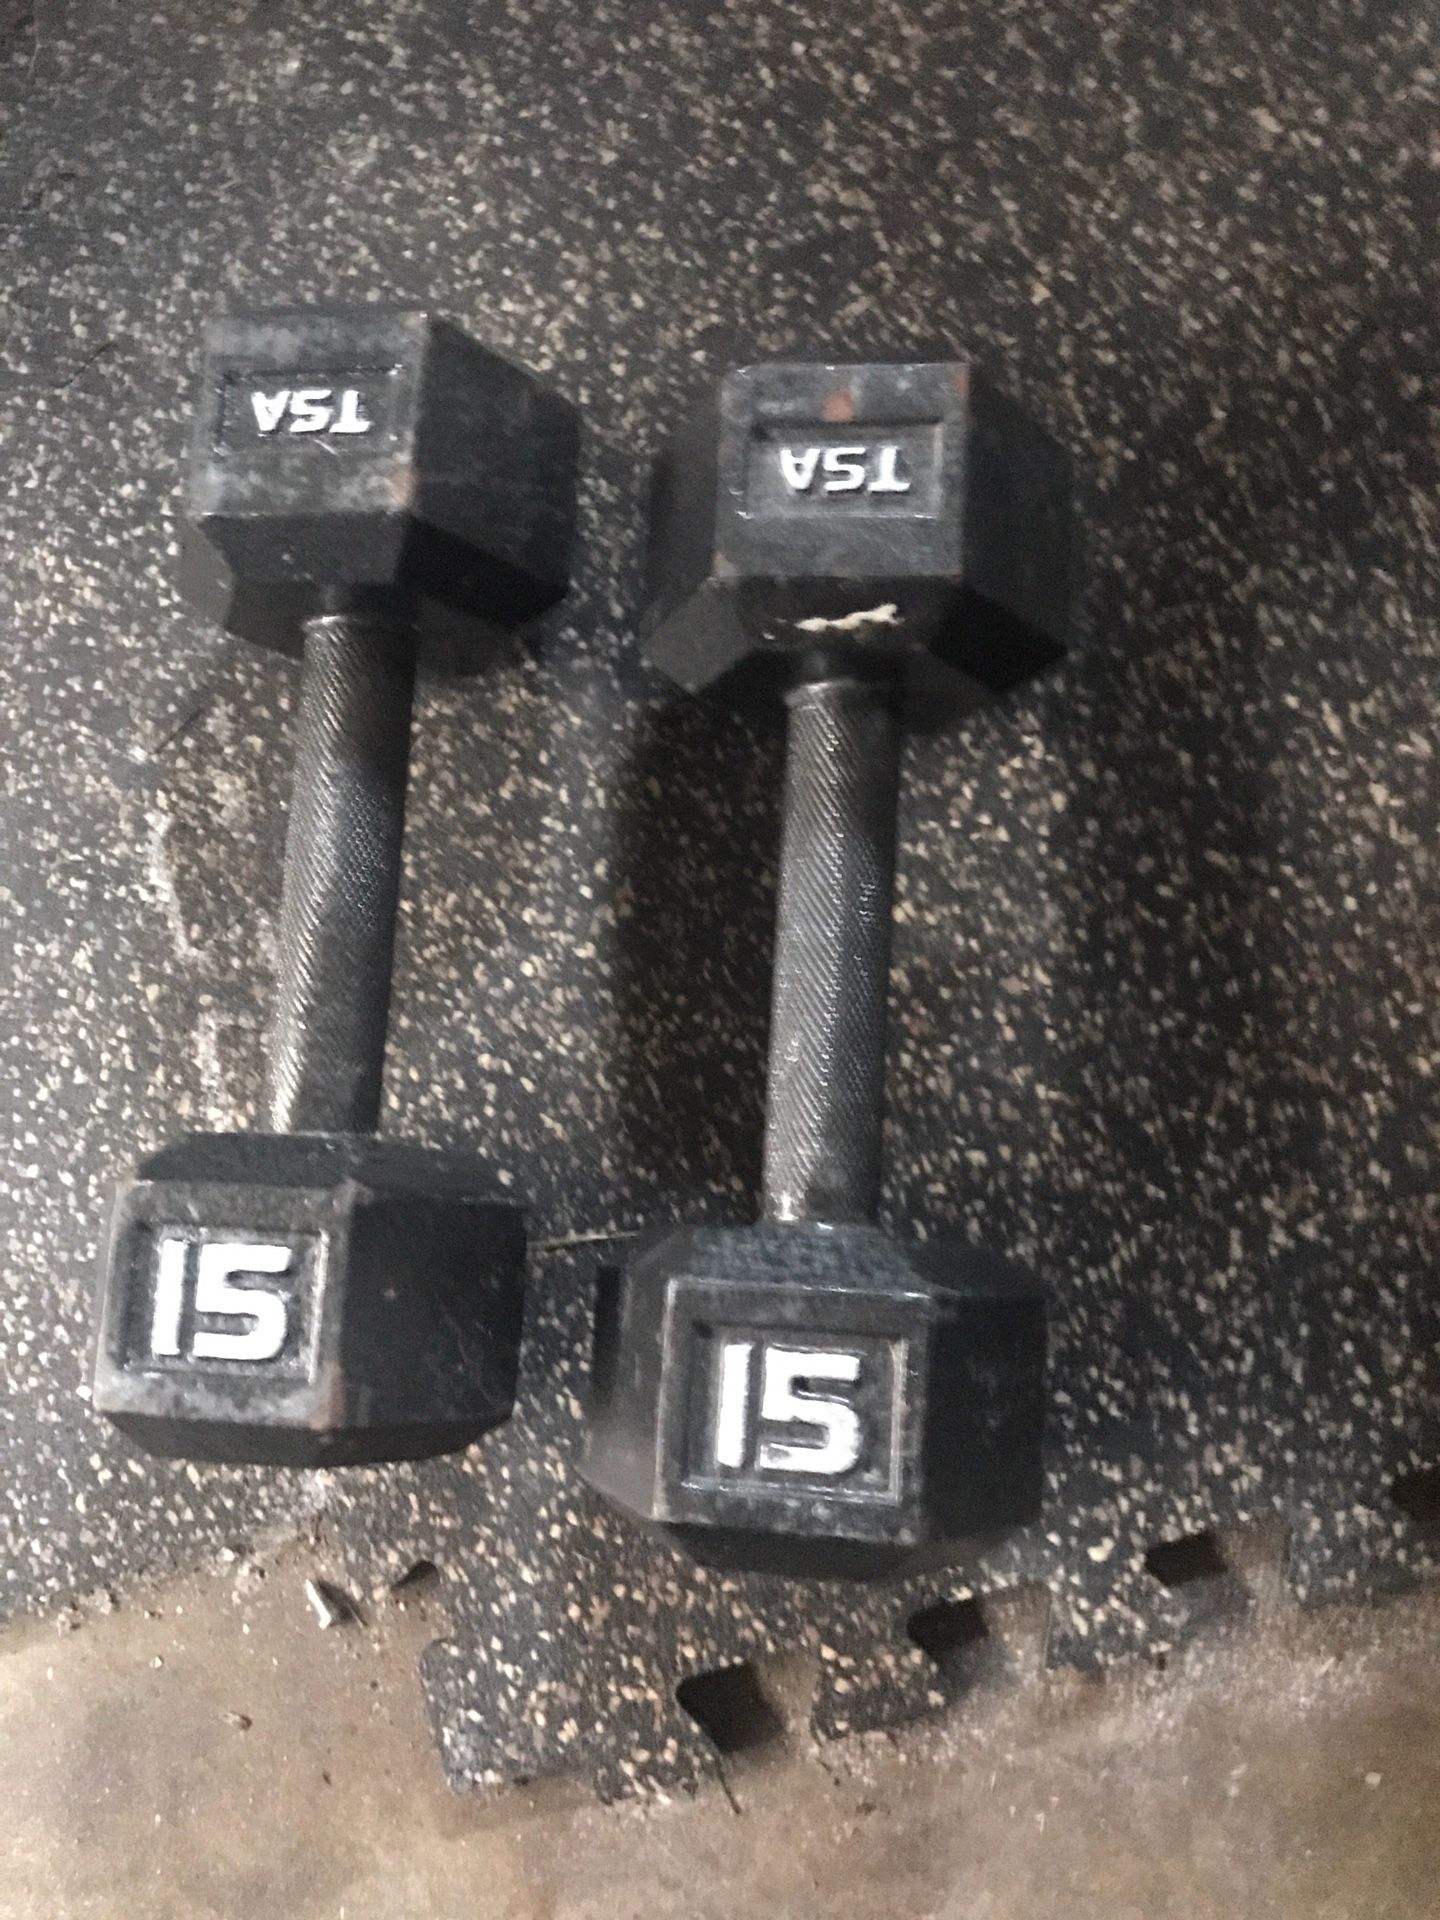 15 lb weights